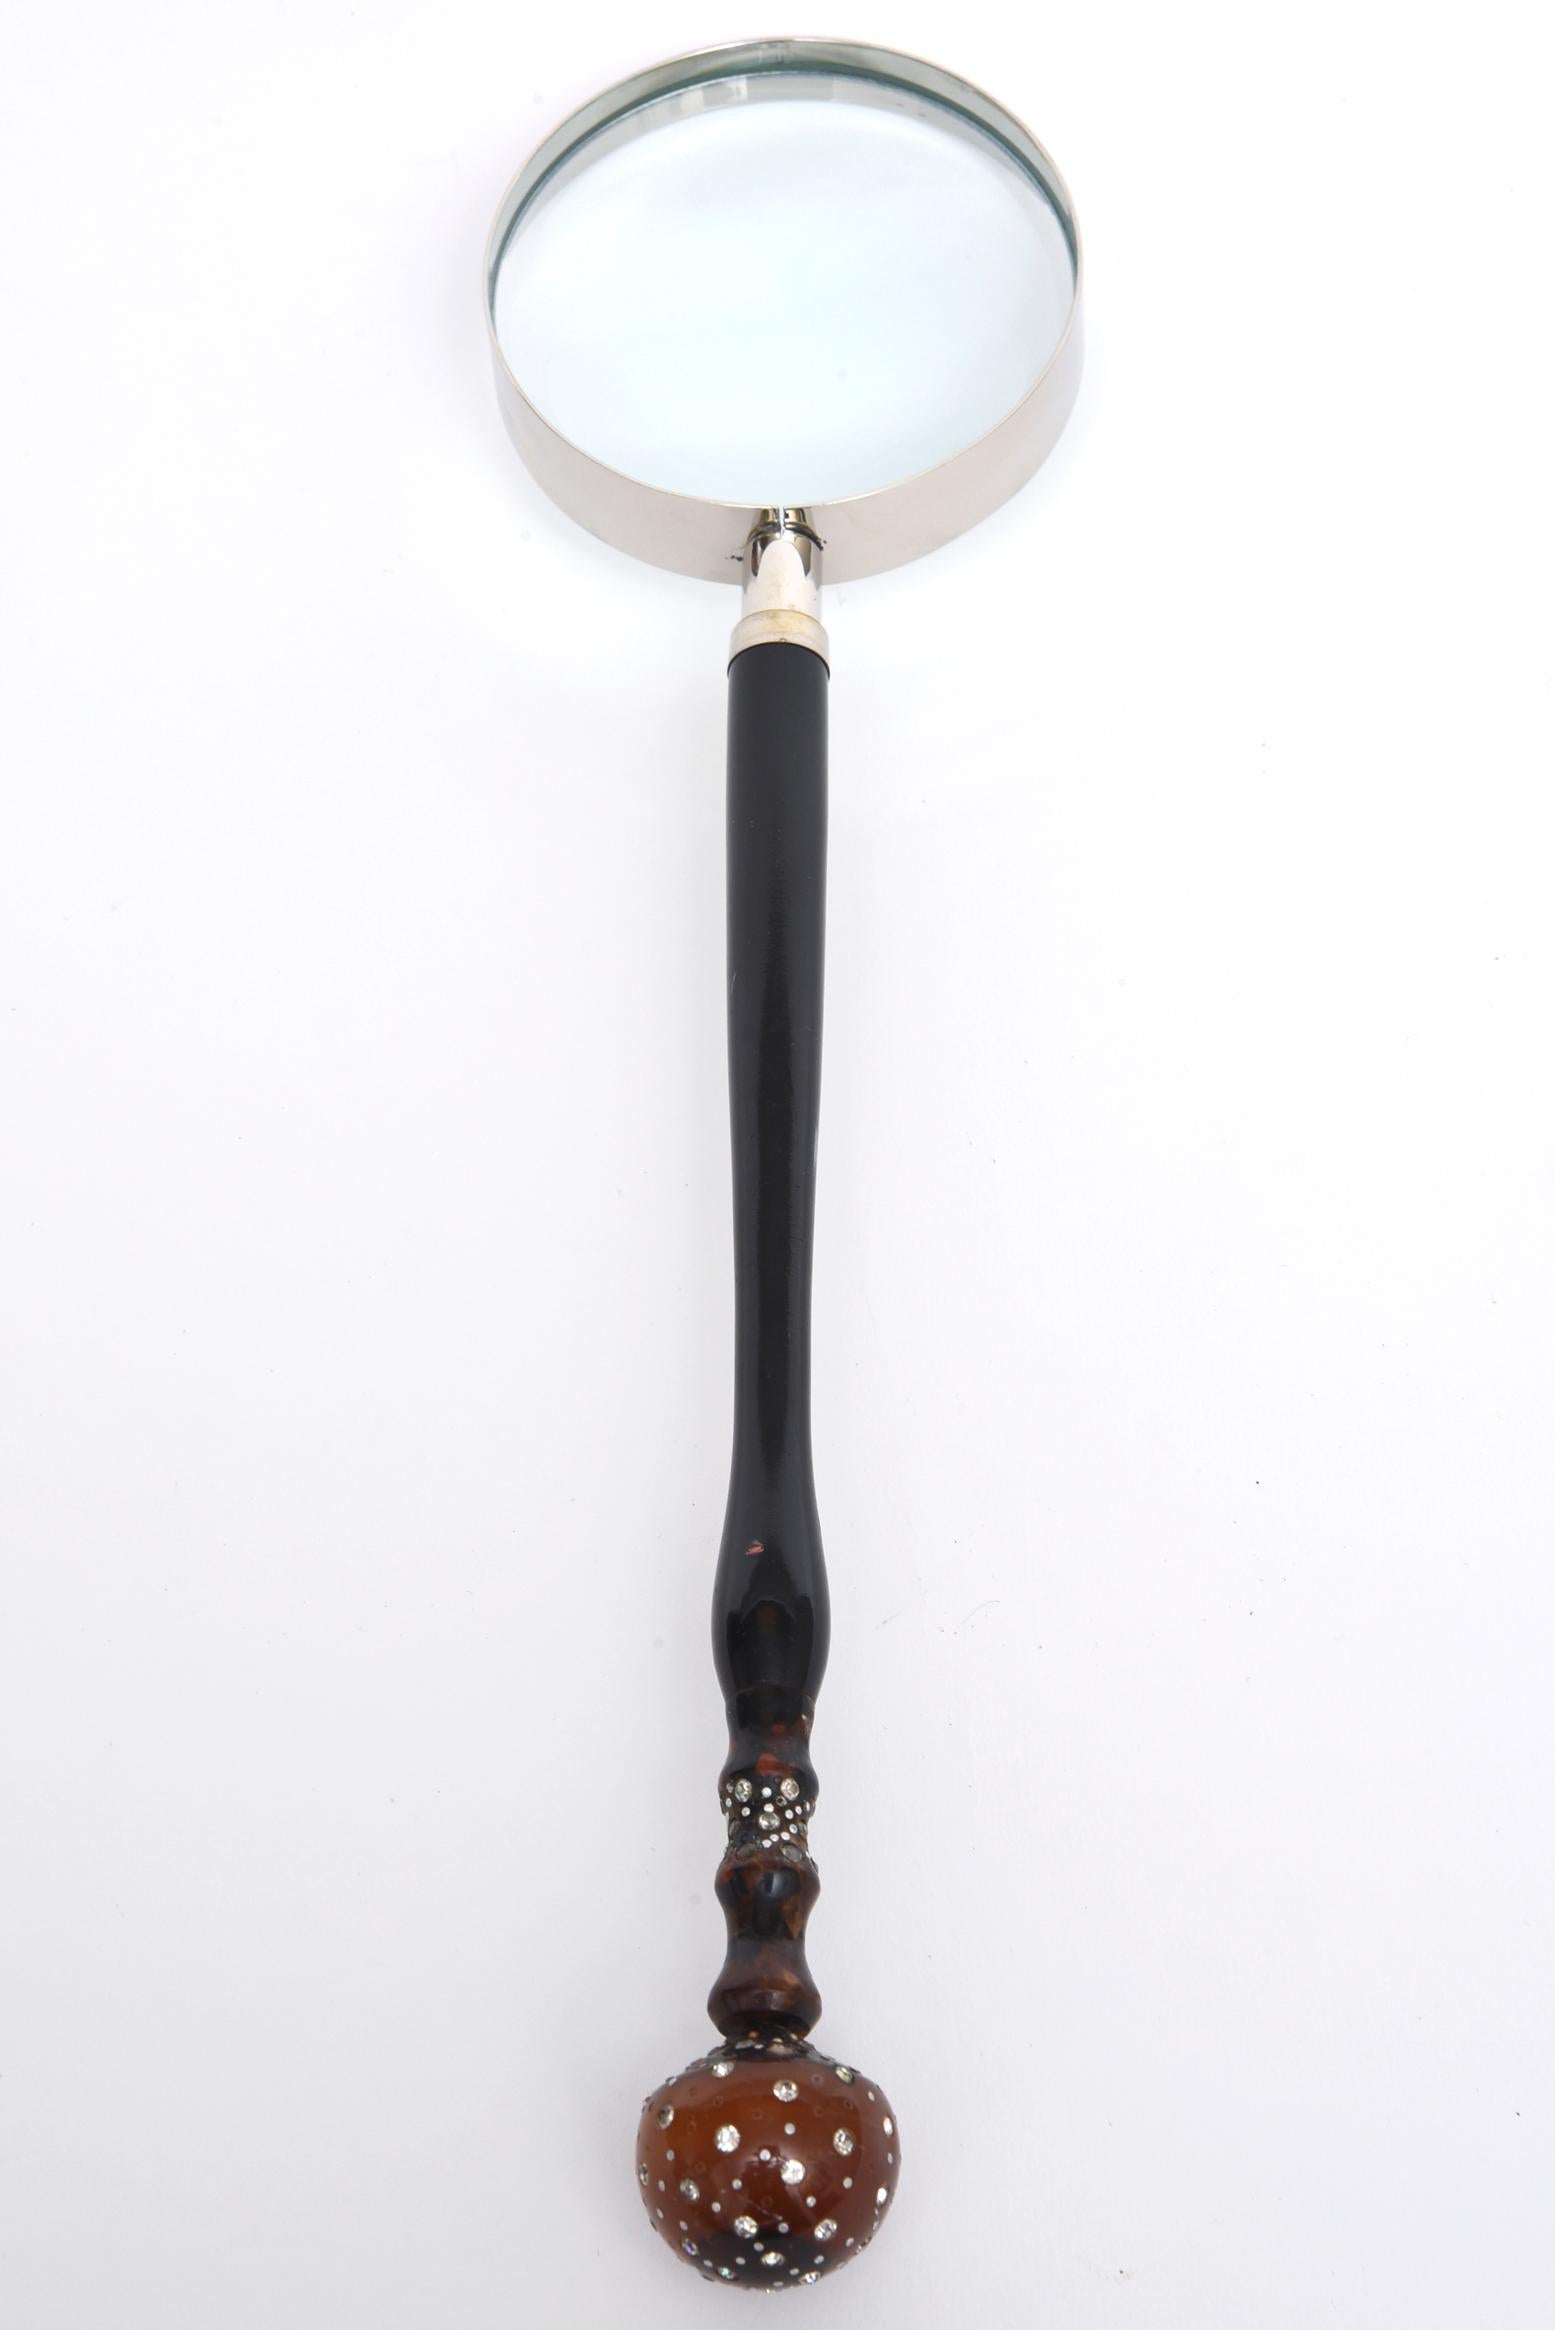 Magnifier with round Bakelite ball accent encrusted with rhinestones, connected to a long ebony handle. The chrome magnifier is a later addition to the vintage handle.